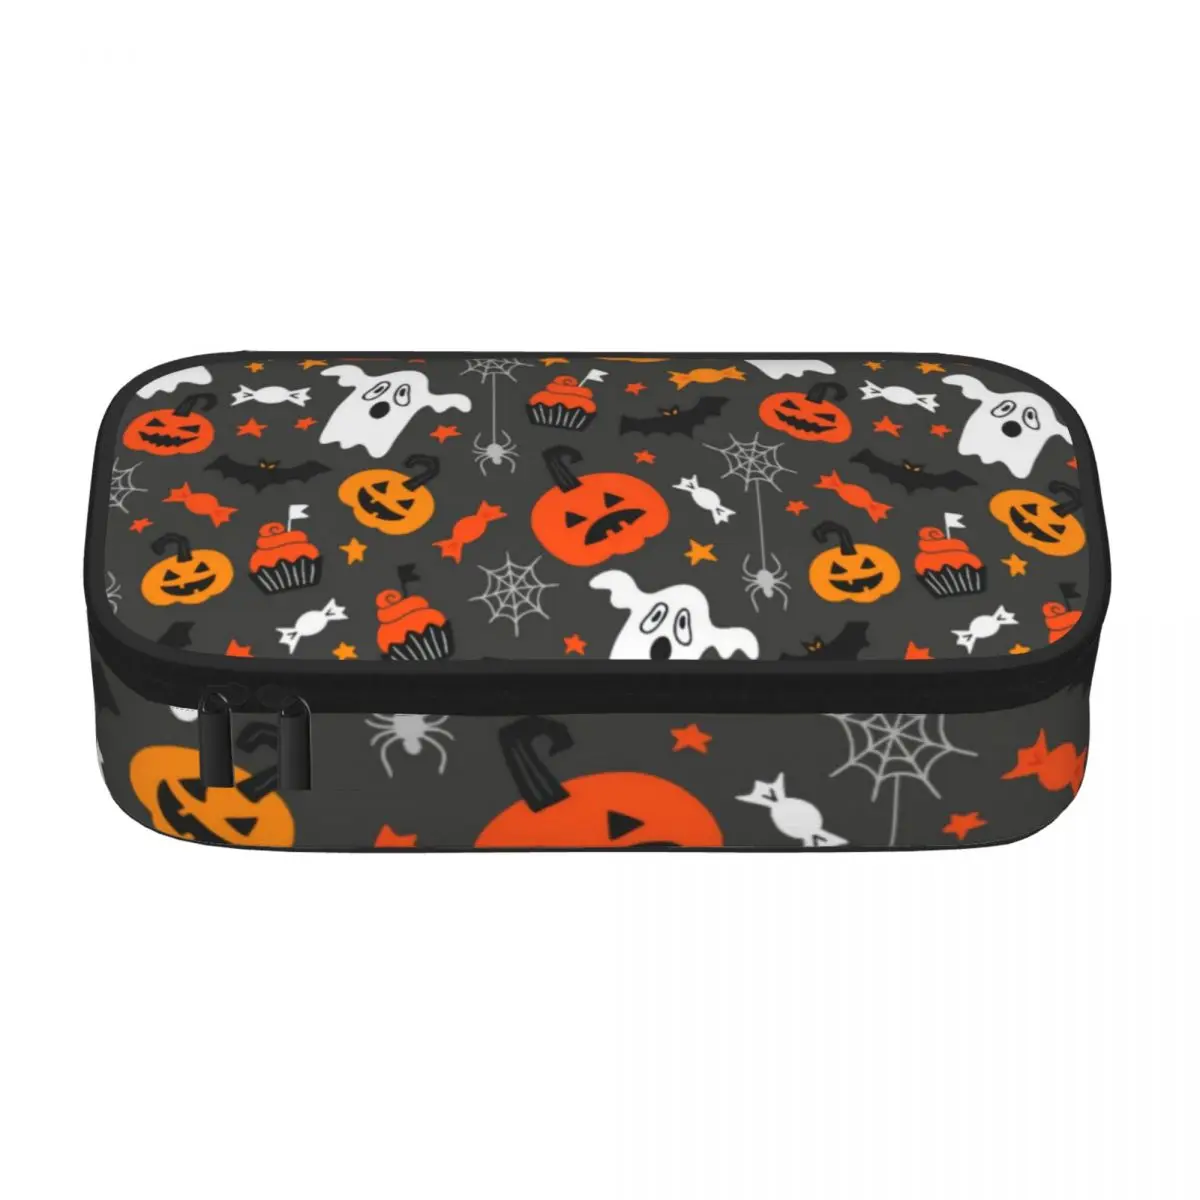 Spooky Ghost Pencil Case Pumpkins And Baws Large Capacity Cool Zipper Pencil Box For Teens Stationery Pen Bags